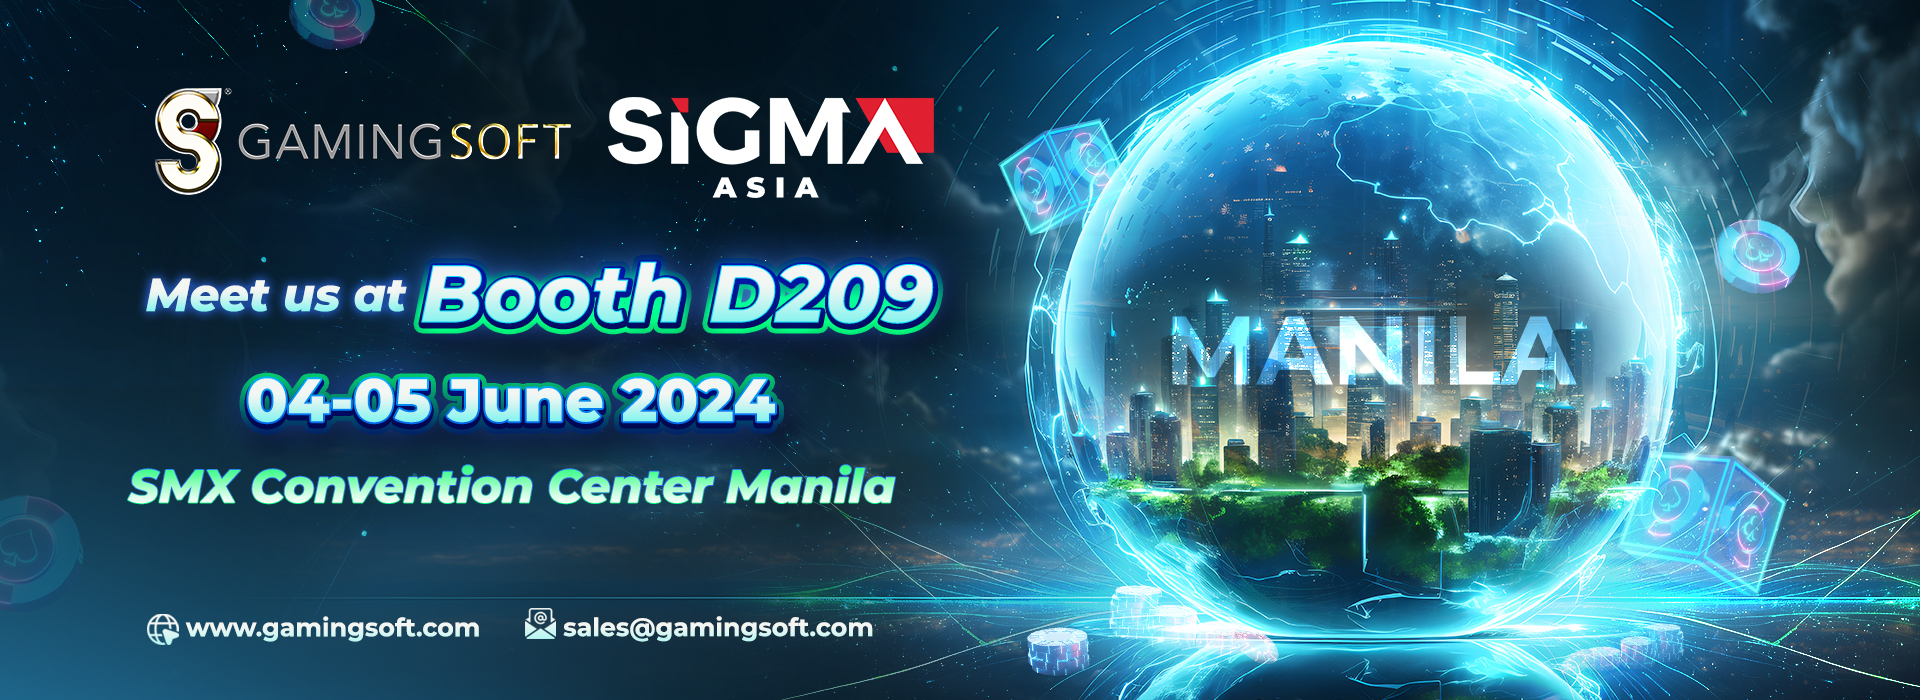 Sigma Asia 2024 Meet us at Booth D209 Web Banner - GamingSof